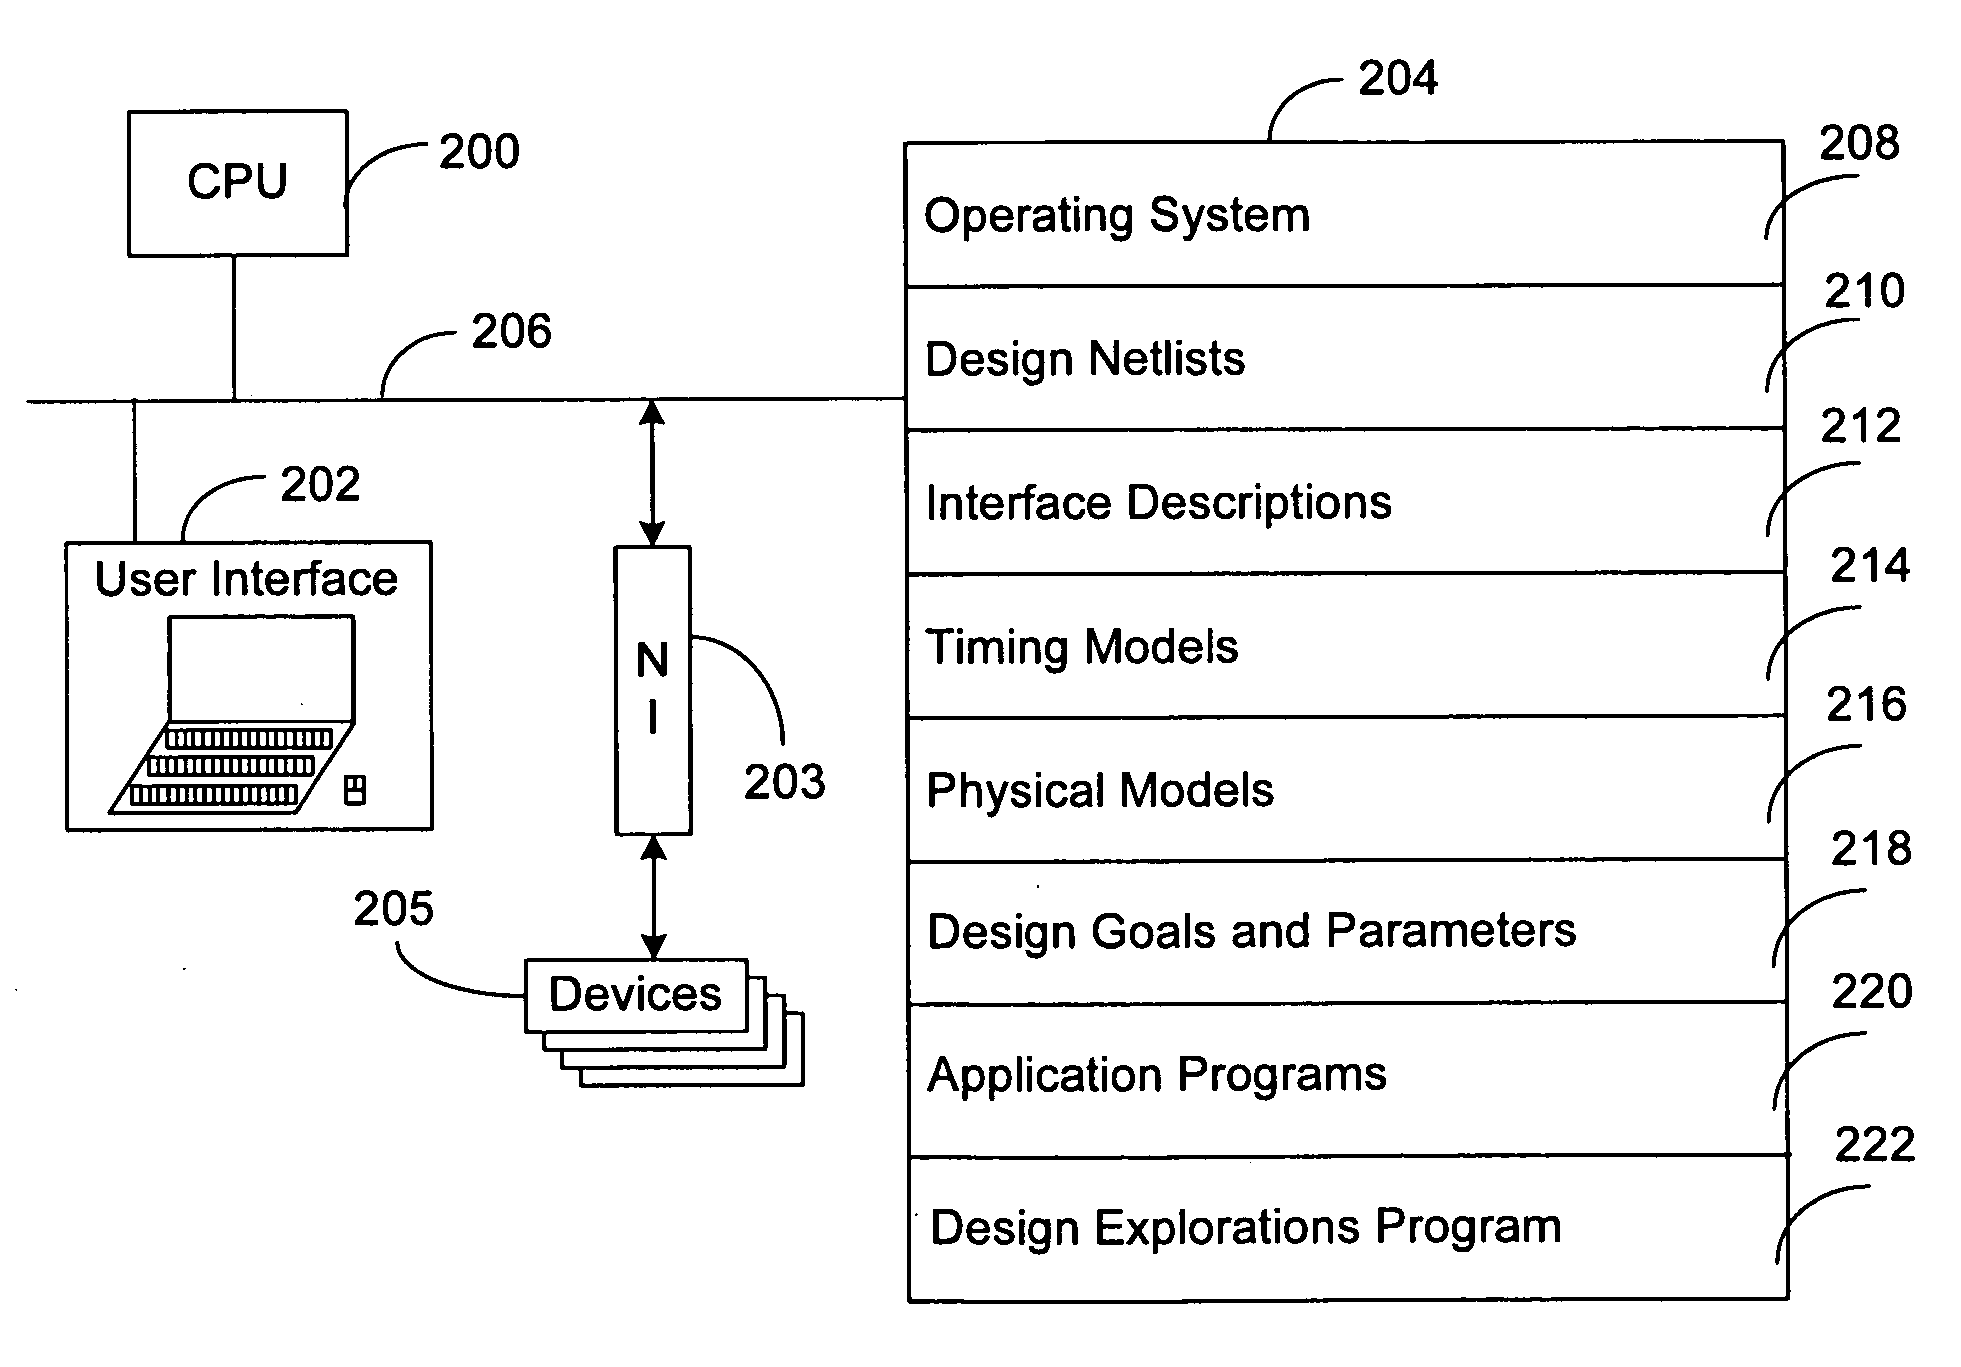 Method and system for conducting design explorations of an integrated circuit